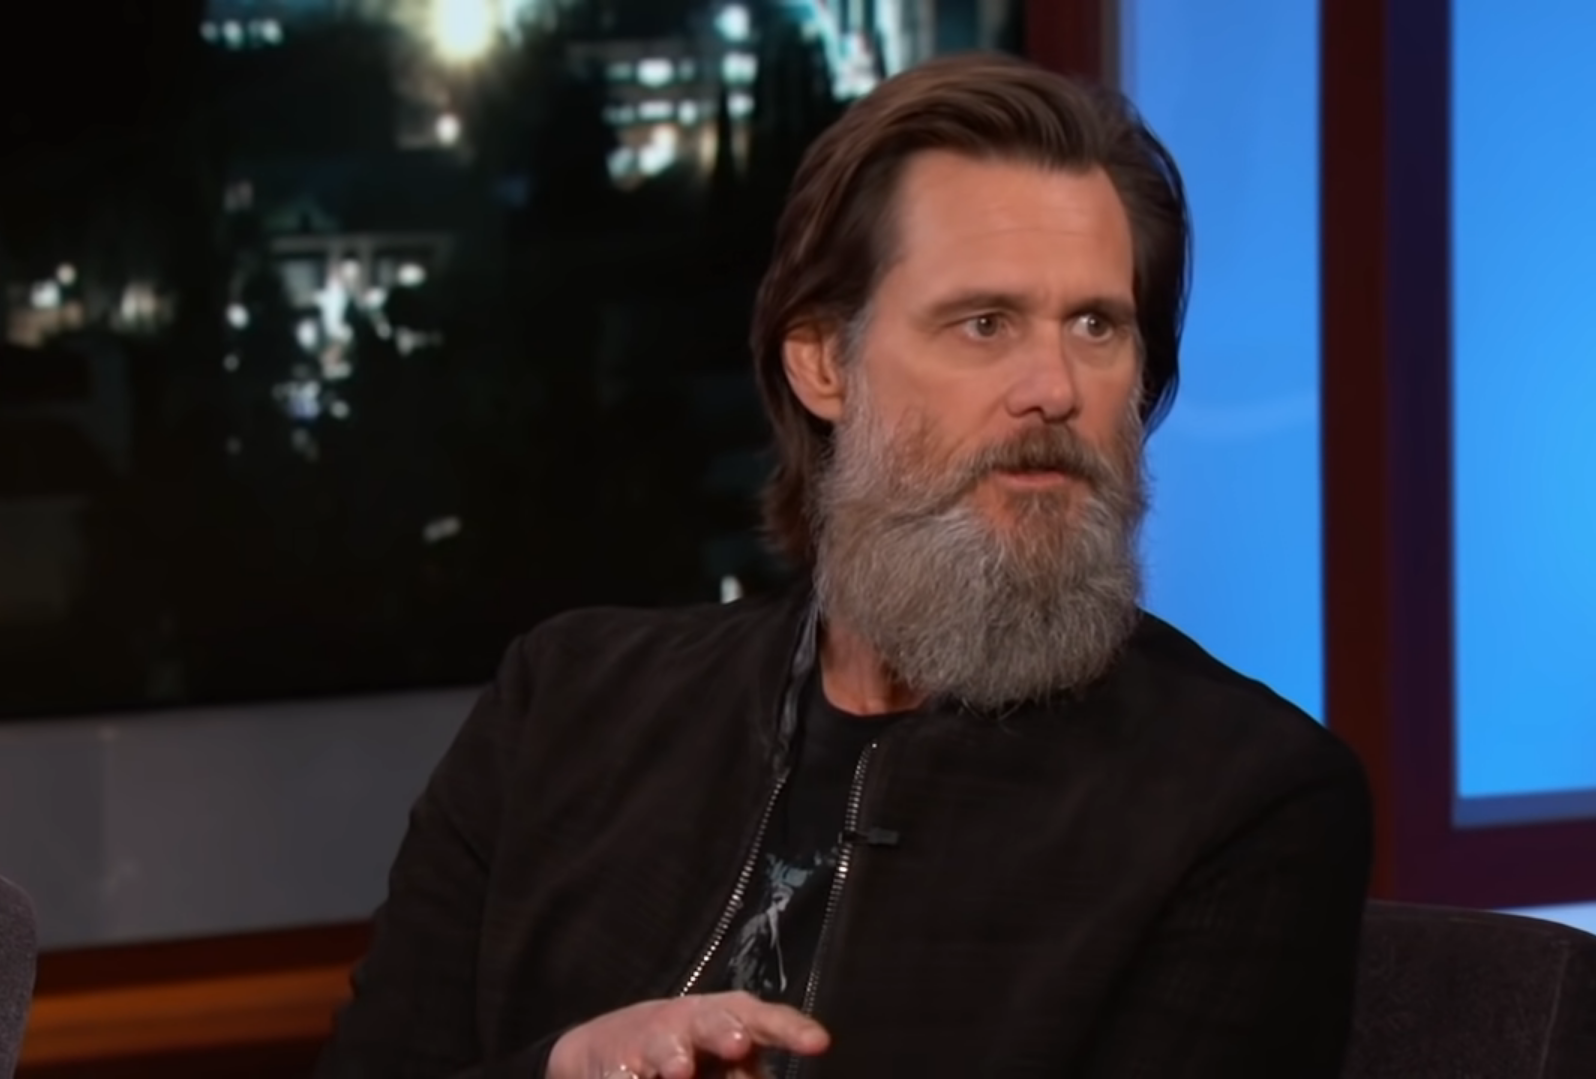 Jim Carrey called Hollywood "spineless" over applause for Will Smith